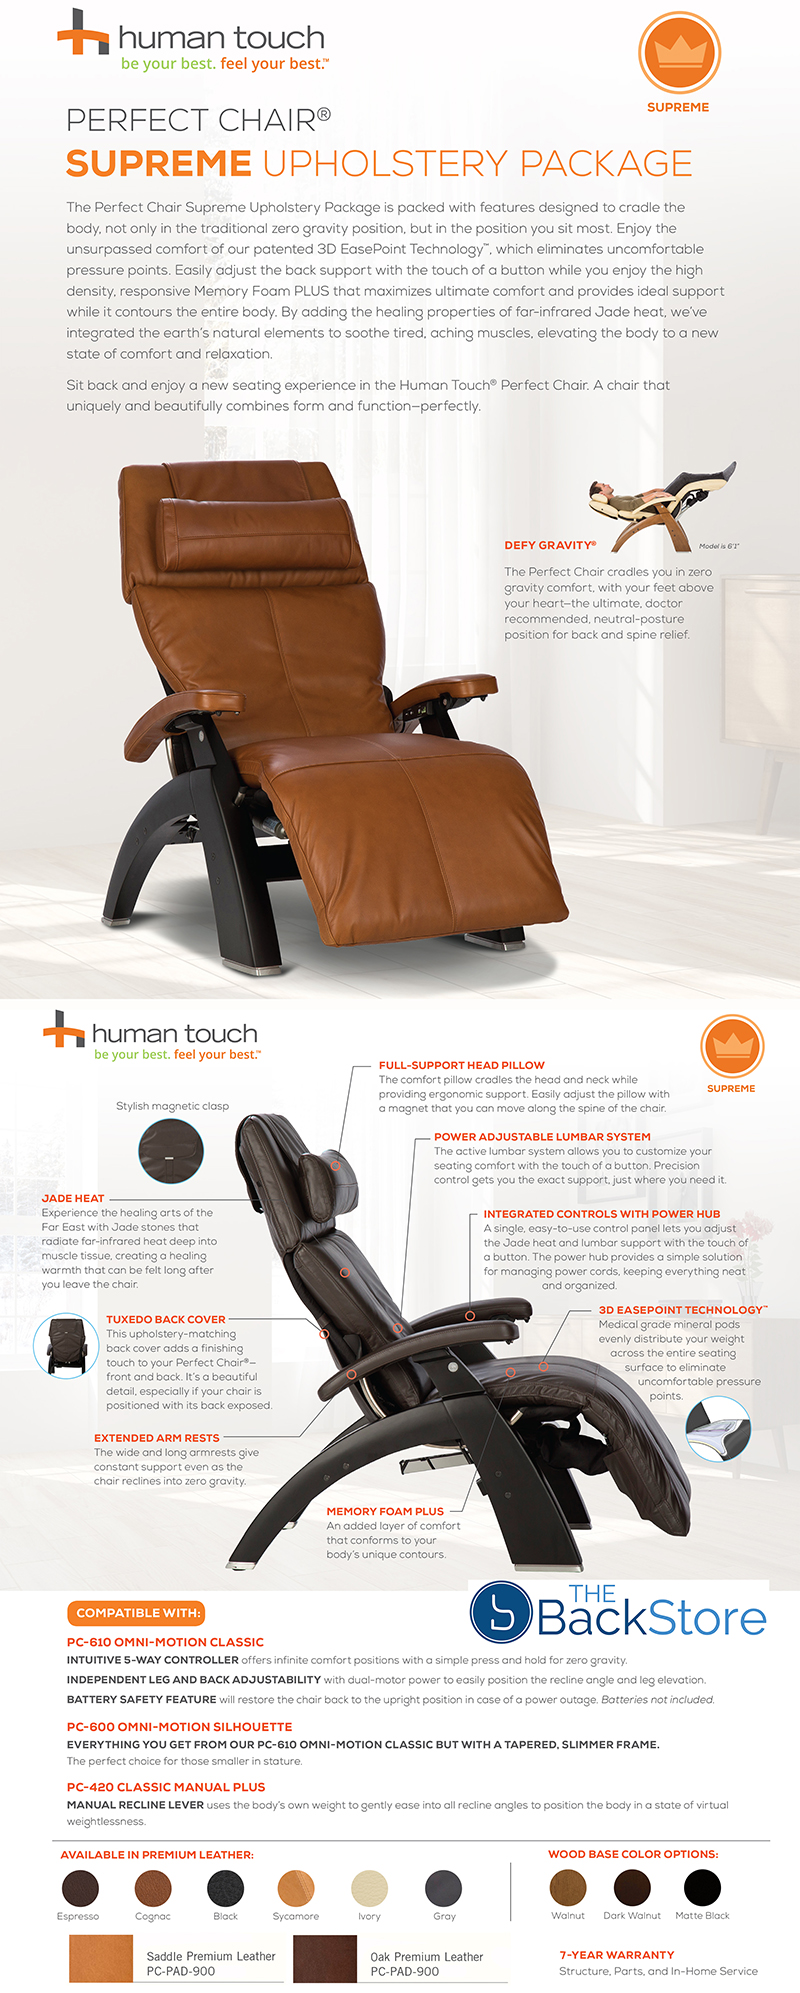 Human Touch Perfect Chair Zero Gravity Recliner with Supreme Upholstery Package